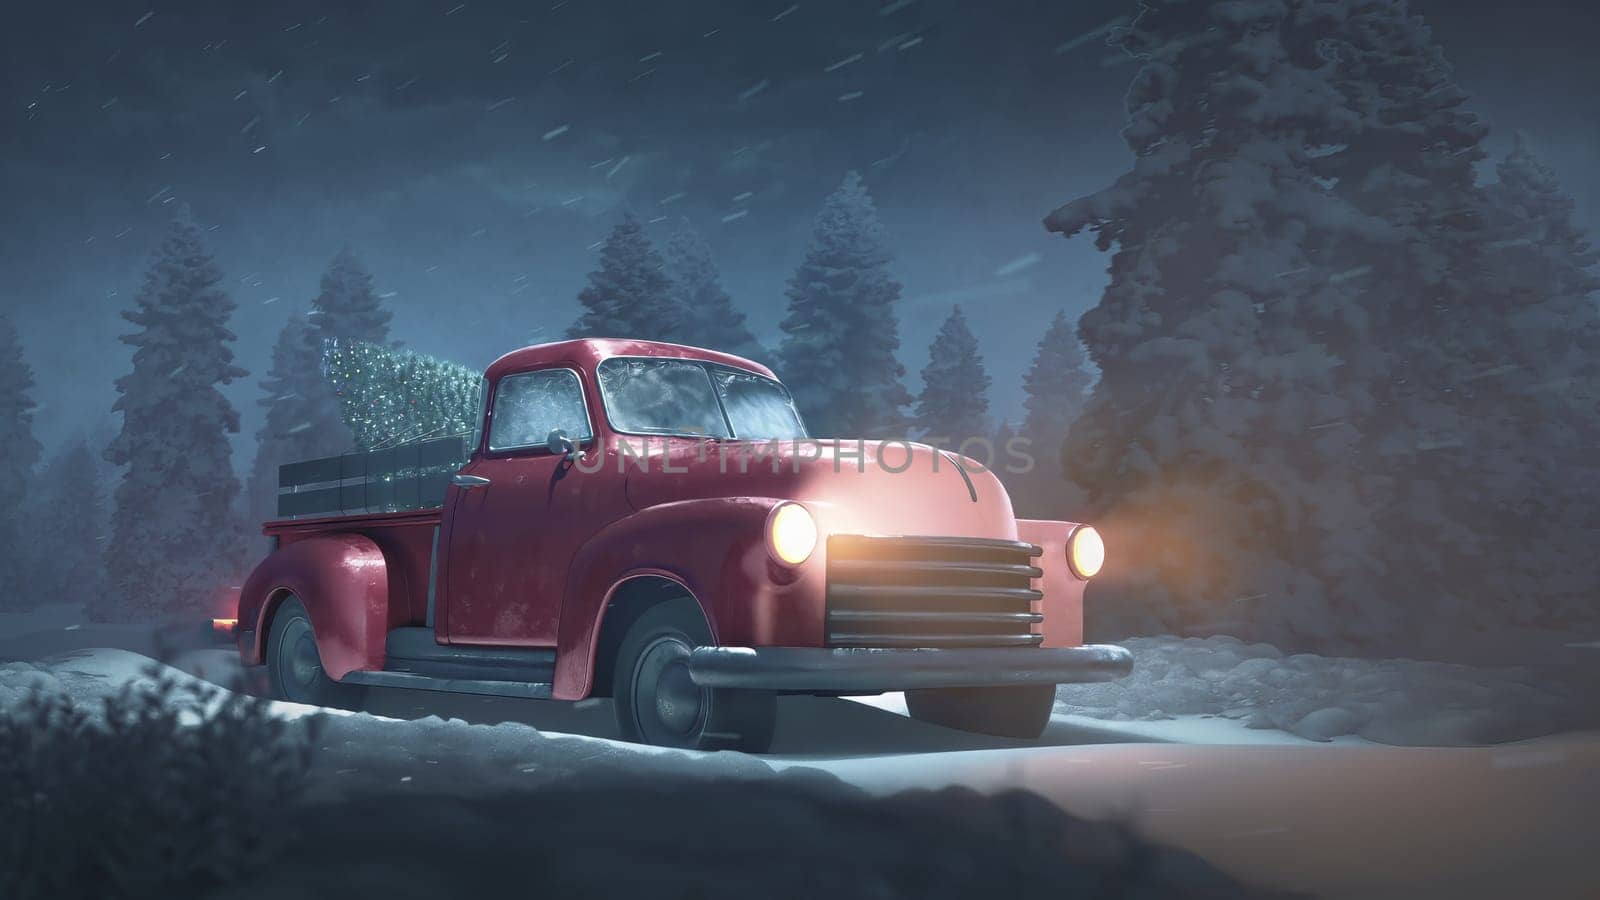 3D render Christmas pickup truck driving with a Christmas tree through a snowy forest by studiodav